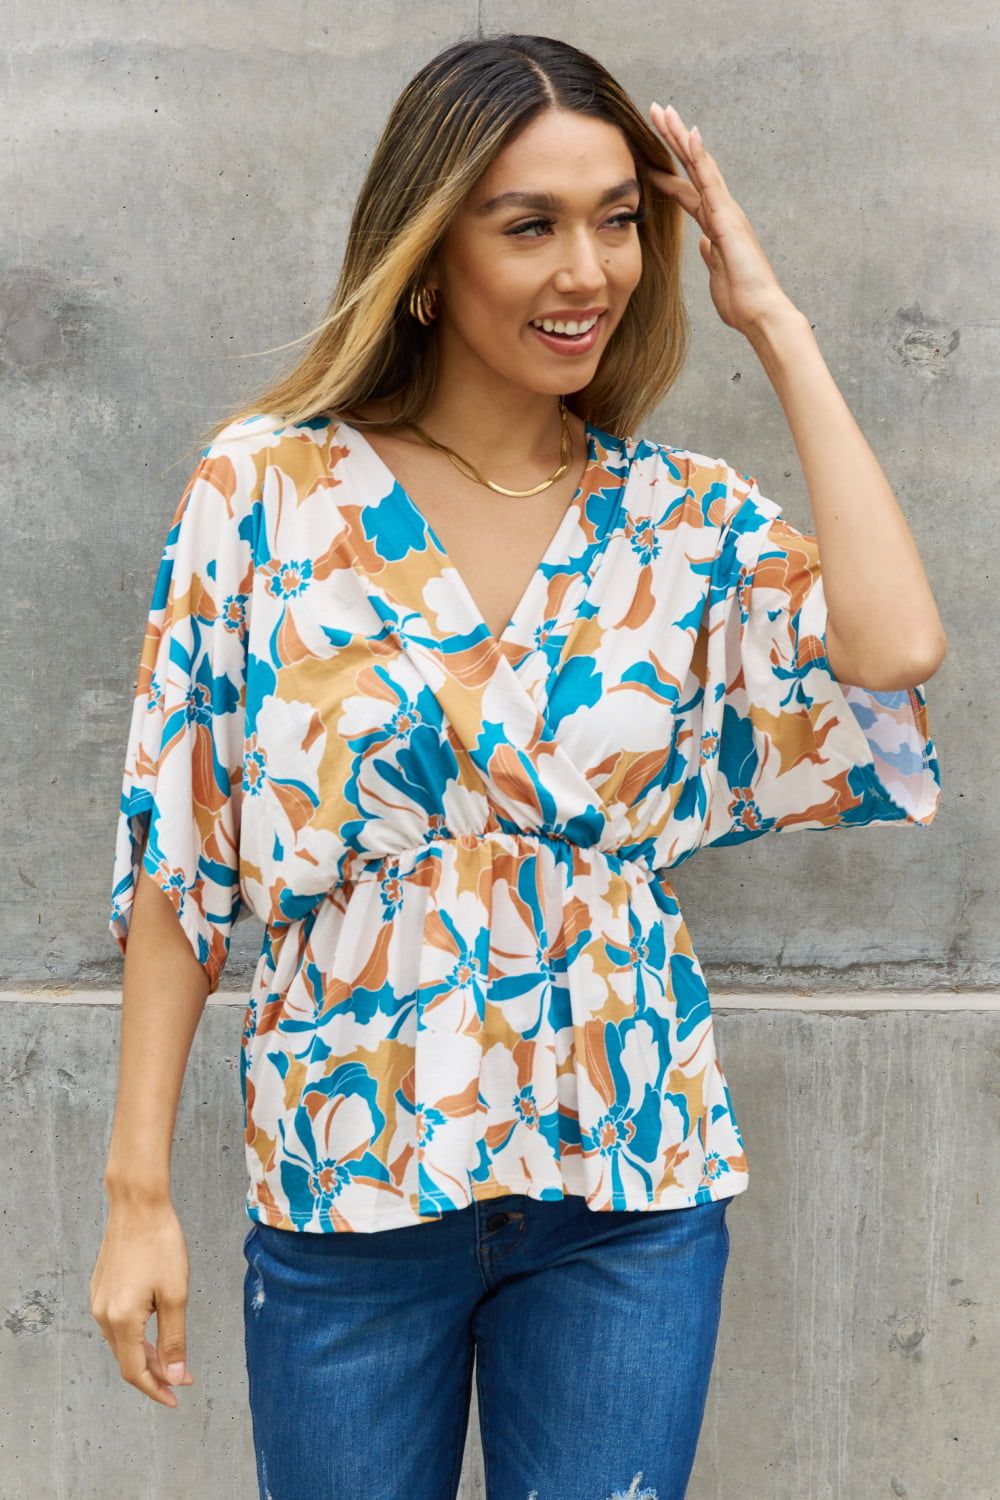 BOMBOM Floral Print Wrap Tunic Top - By Baano